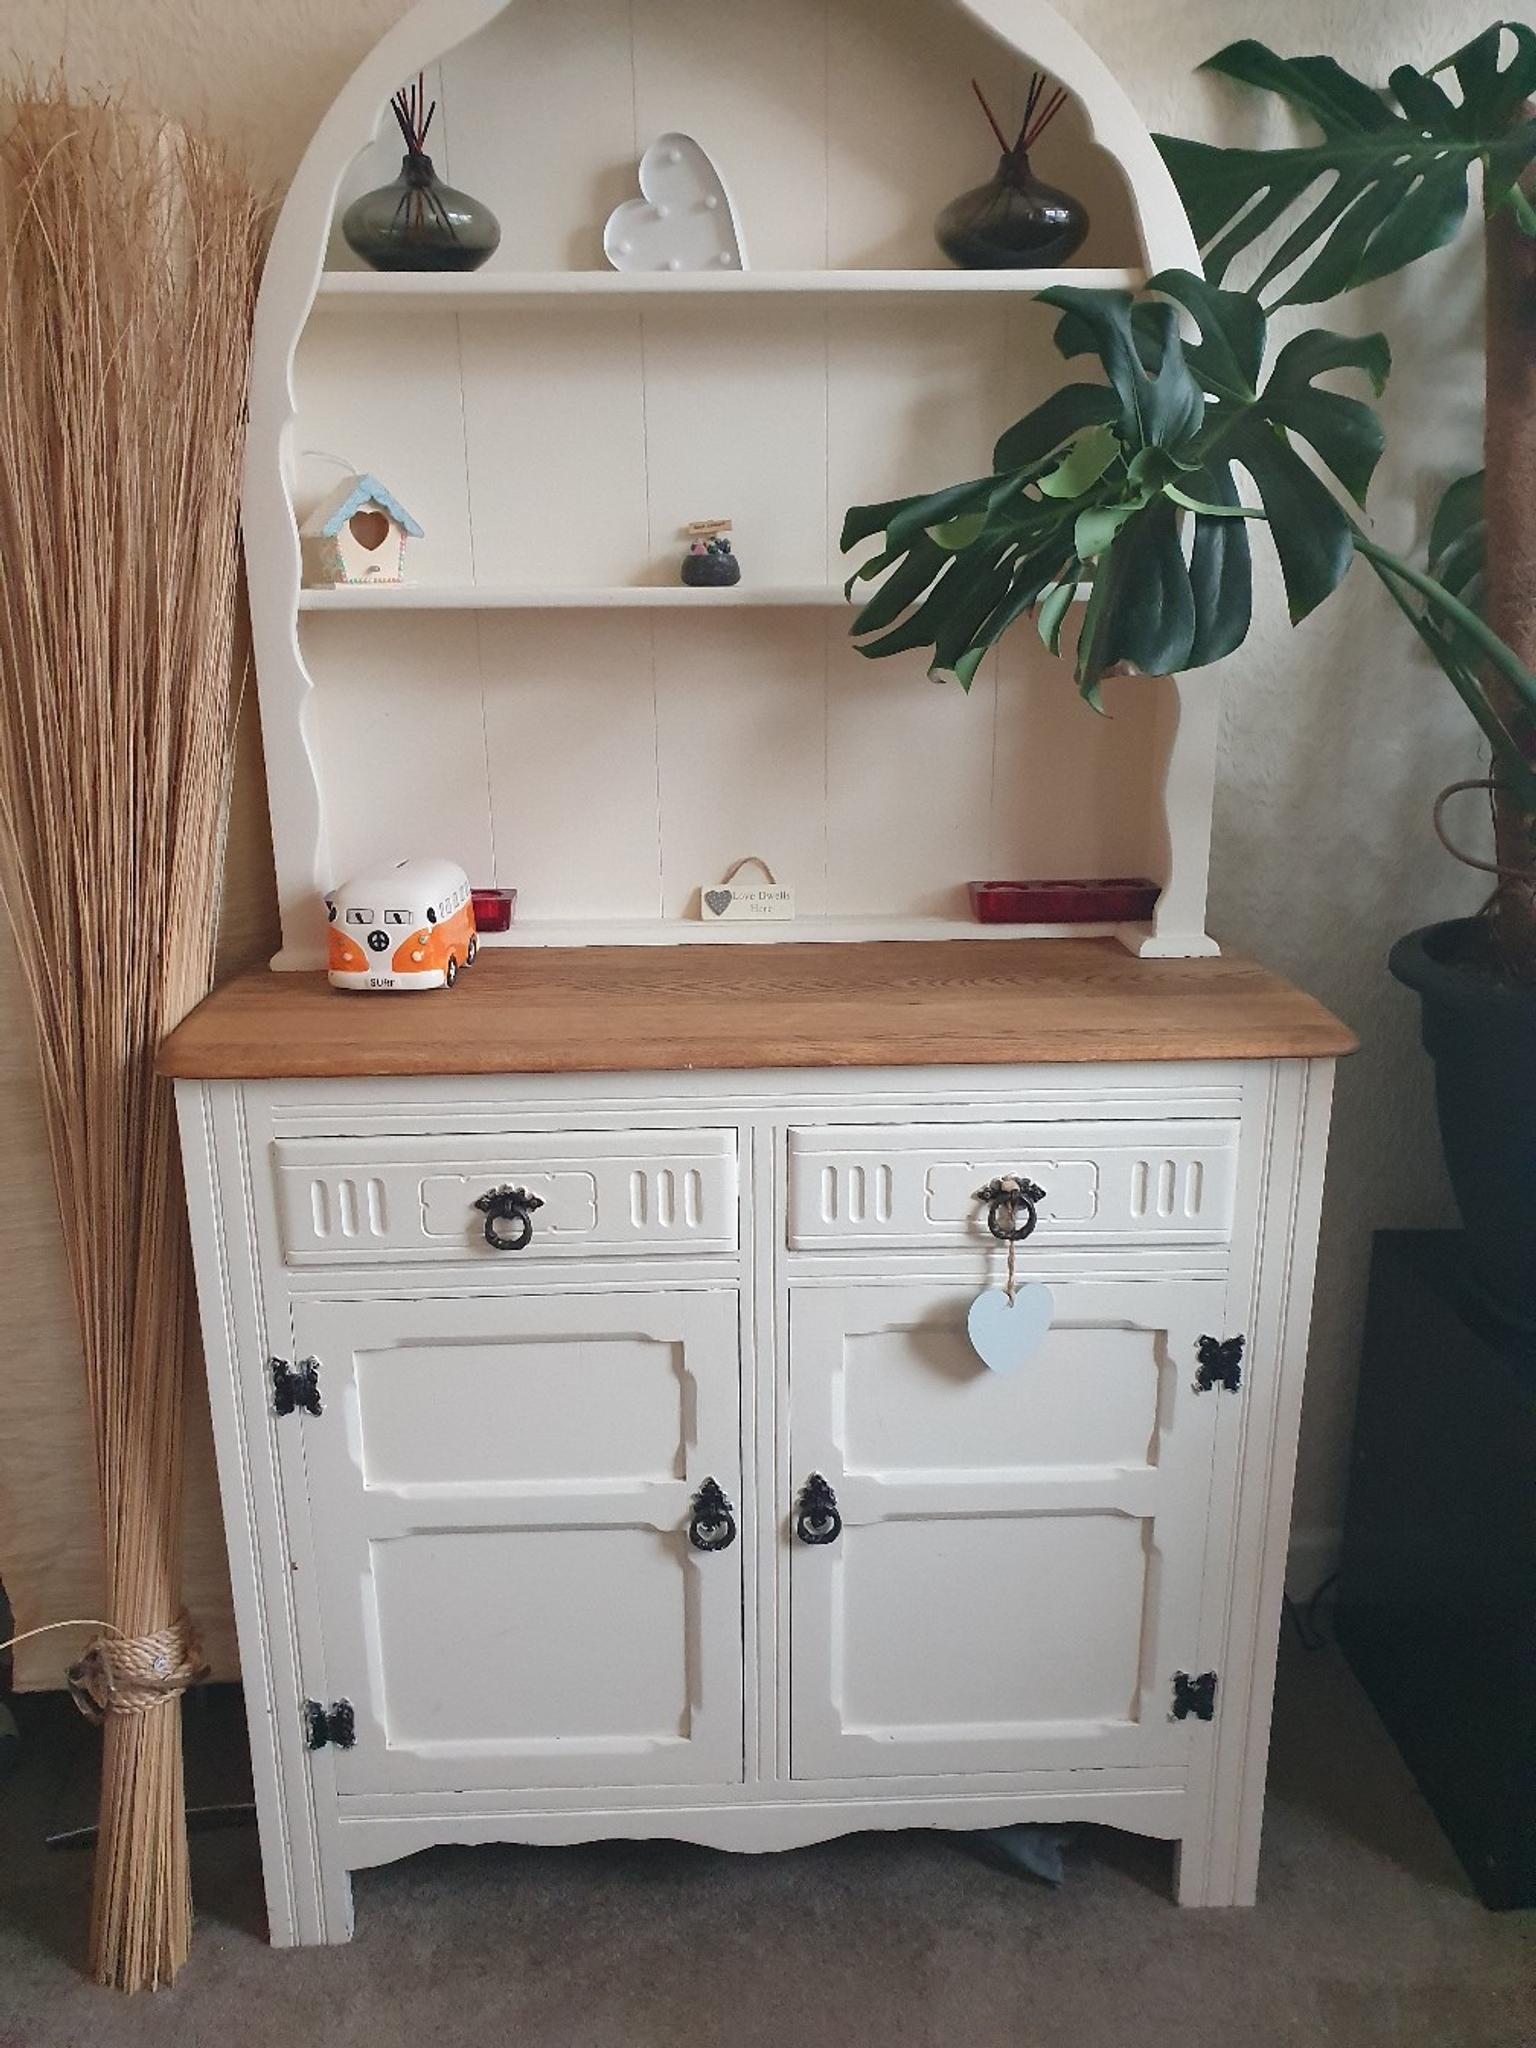 Shabby Chic Dutch Dresser In Cv4 Coventry For 150 00 For Sale